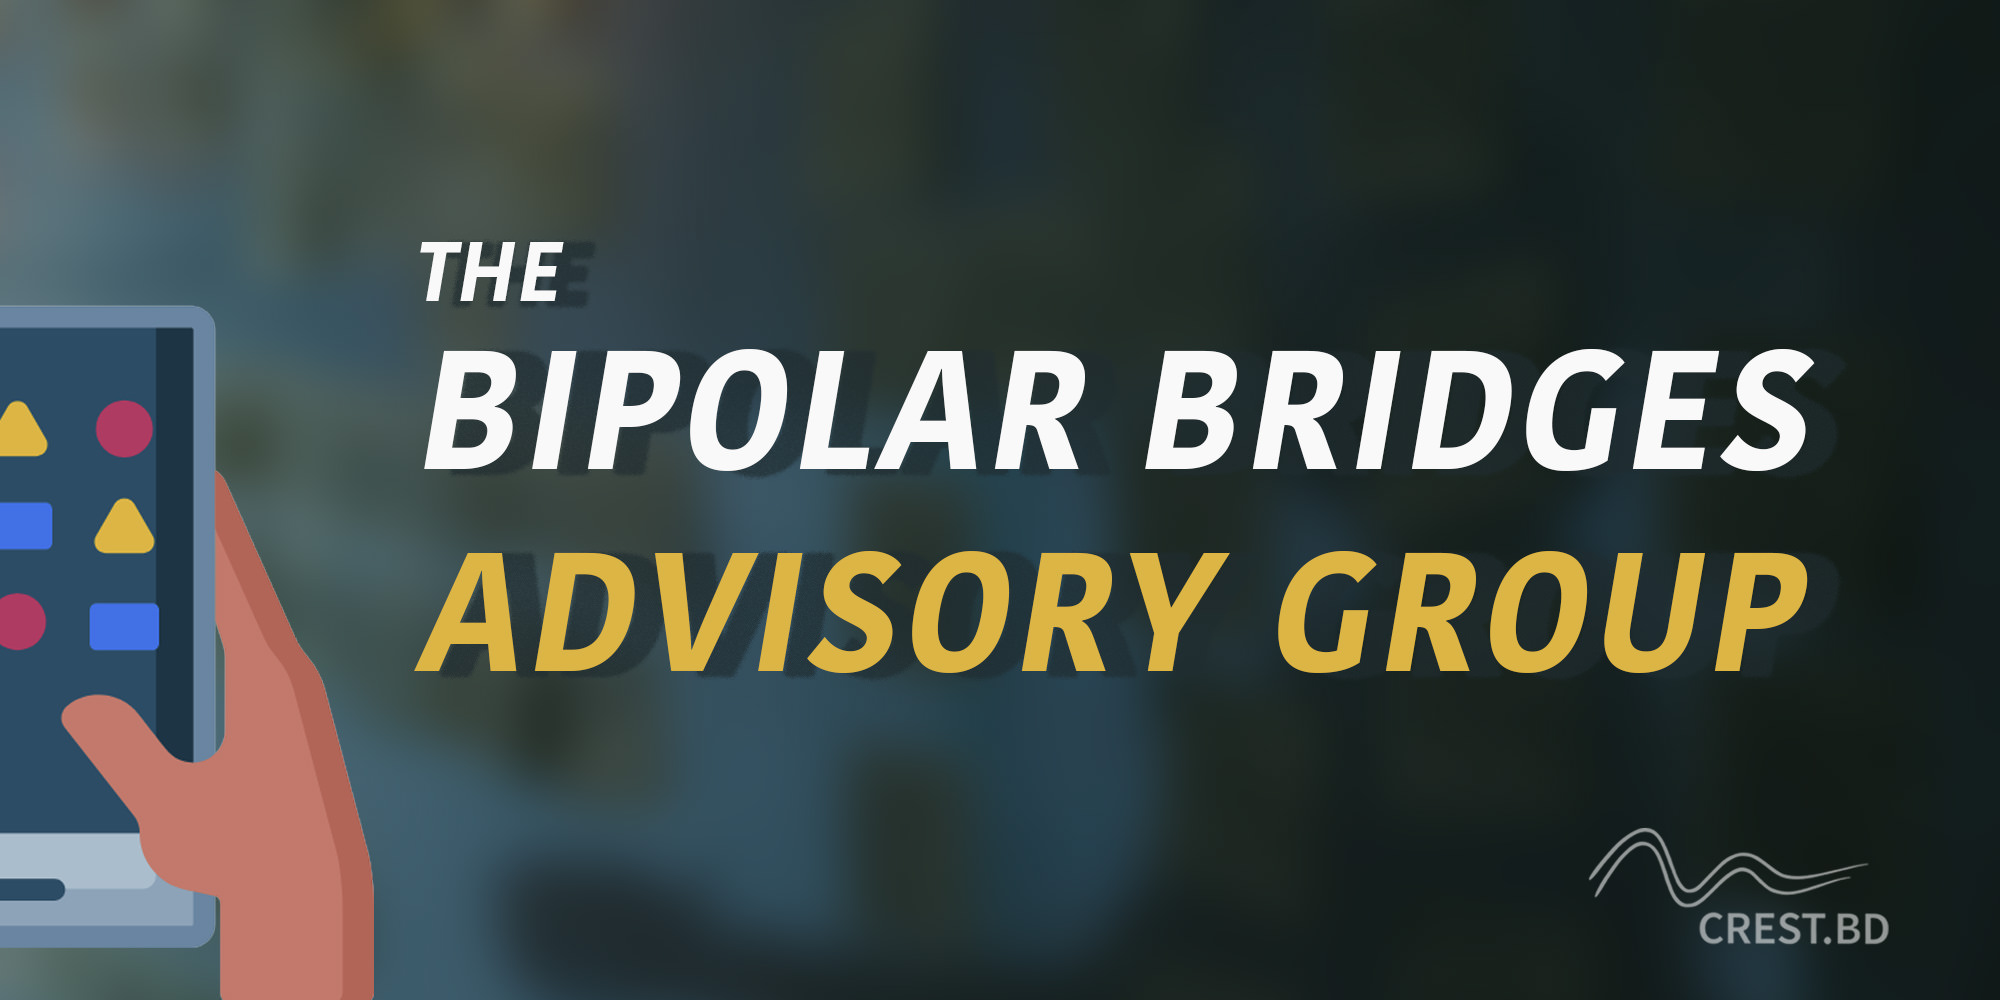 A banner with the words 'The Bipolar Bridges Advisory Group' in big letters. There appears to be a photo in the background, but it is heavily blurred so it is unclear what is in the photo. The colours are dark, with blue, yellow, and reddish shades. On the left-hand side, there is an illustration of a hand on a mobile phone. The CREST.BD logo is in the right-hand corner.